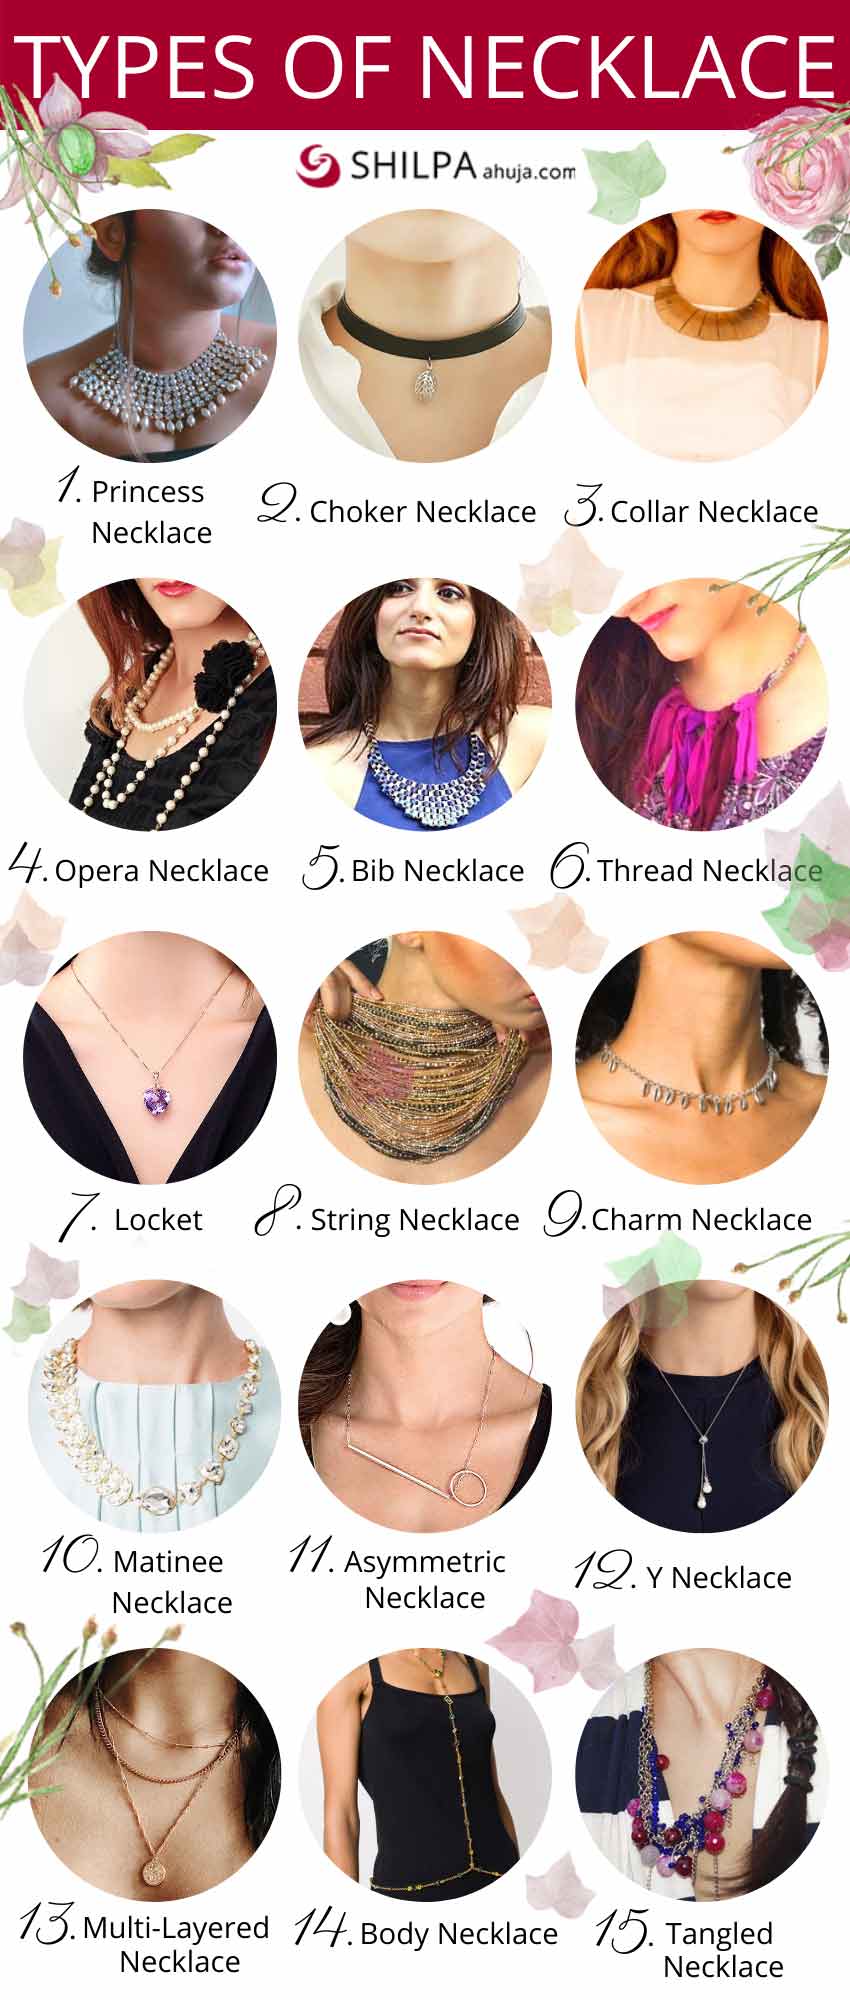 different-Types-of-necklace-jewelry-designs-neckpieces